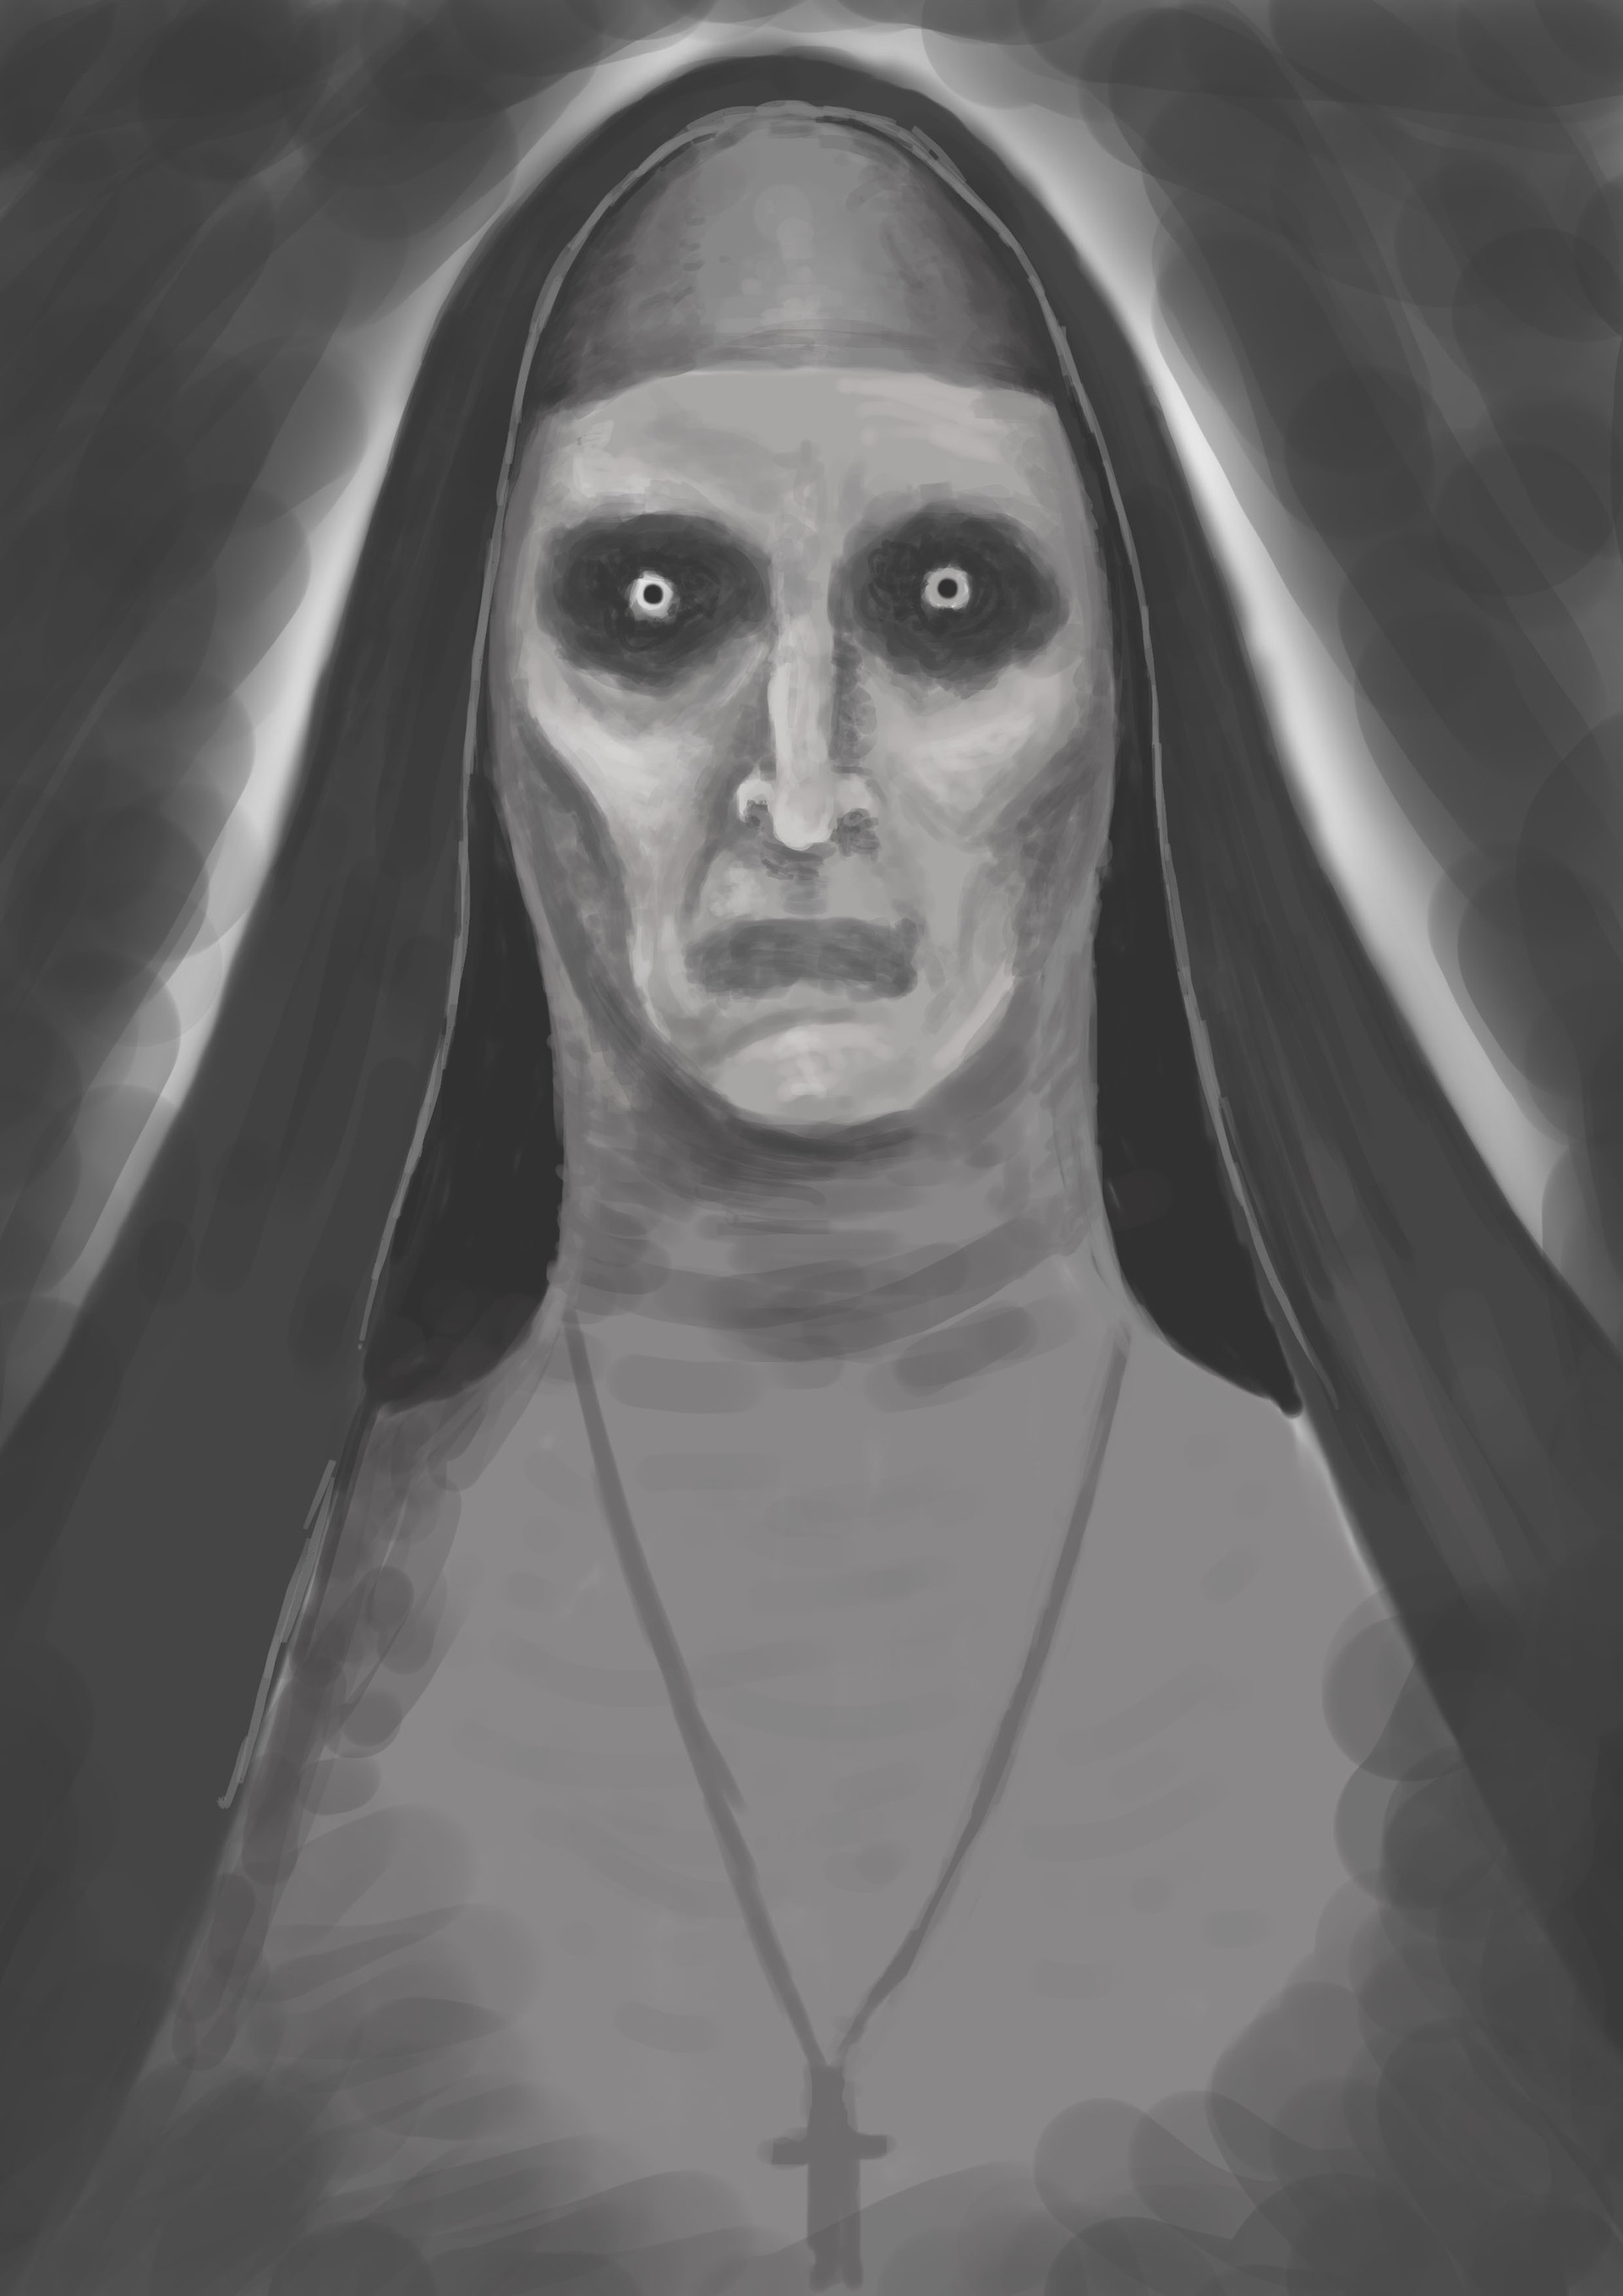 Jeroen Gyesbreghs - Valak painting (The Conjuring 2)